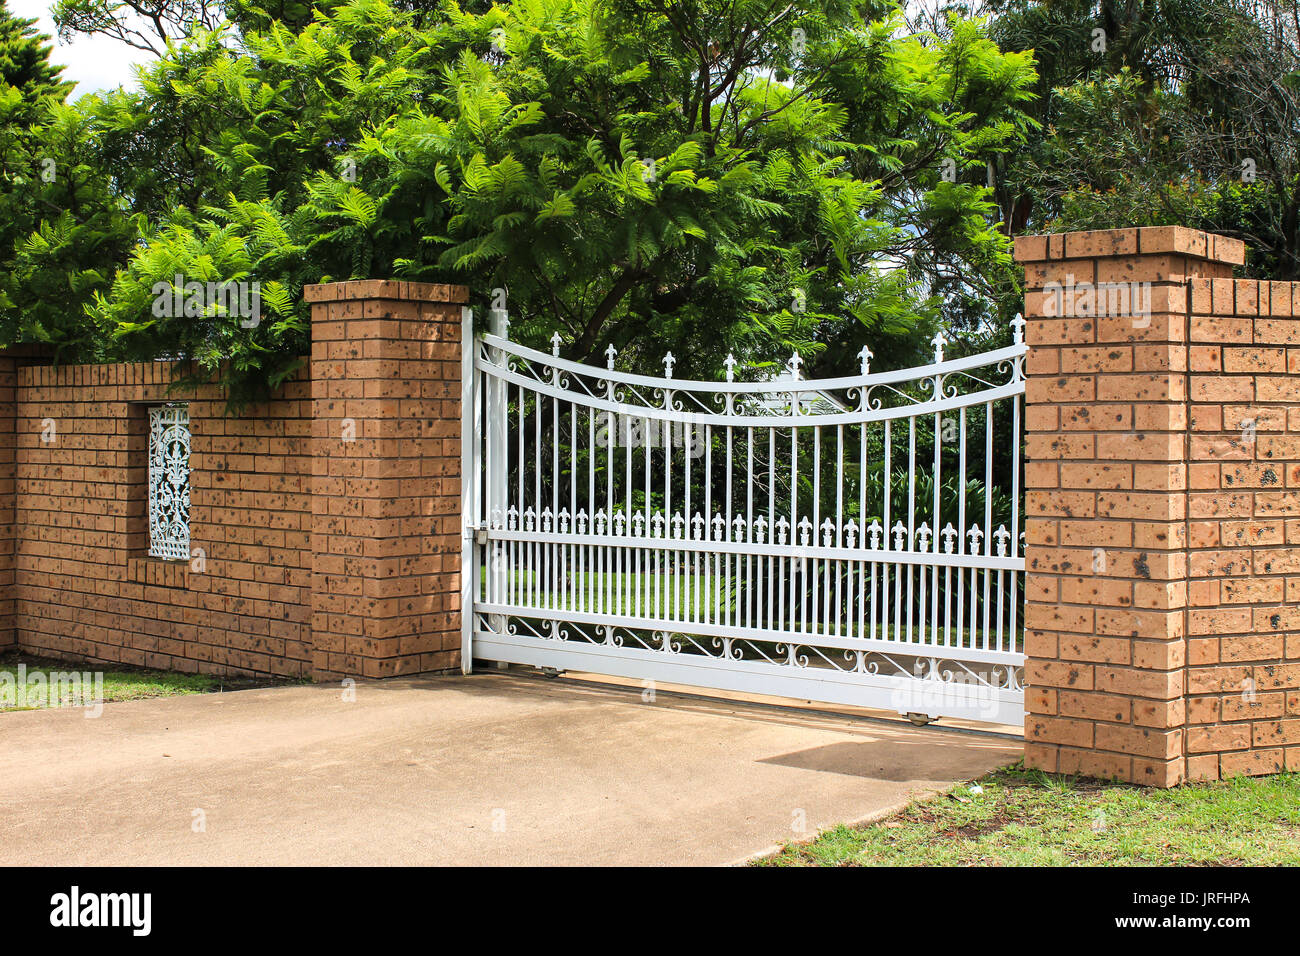 Metal Driveway Entrance Gates Set In Brick Fence With Garden Trees In Stock Photo Alamy,How To Cook A Prime Rib In The Oven